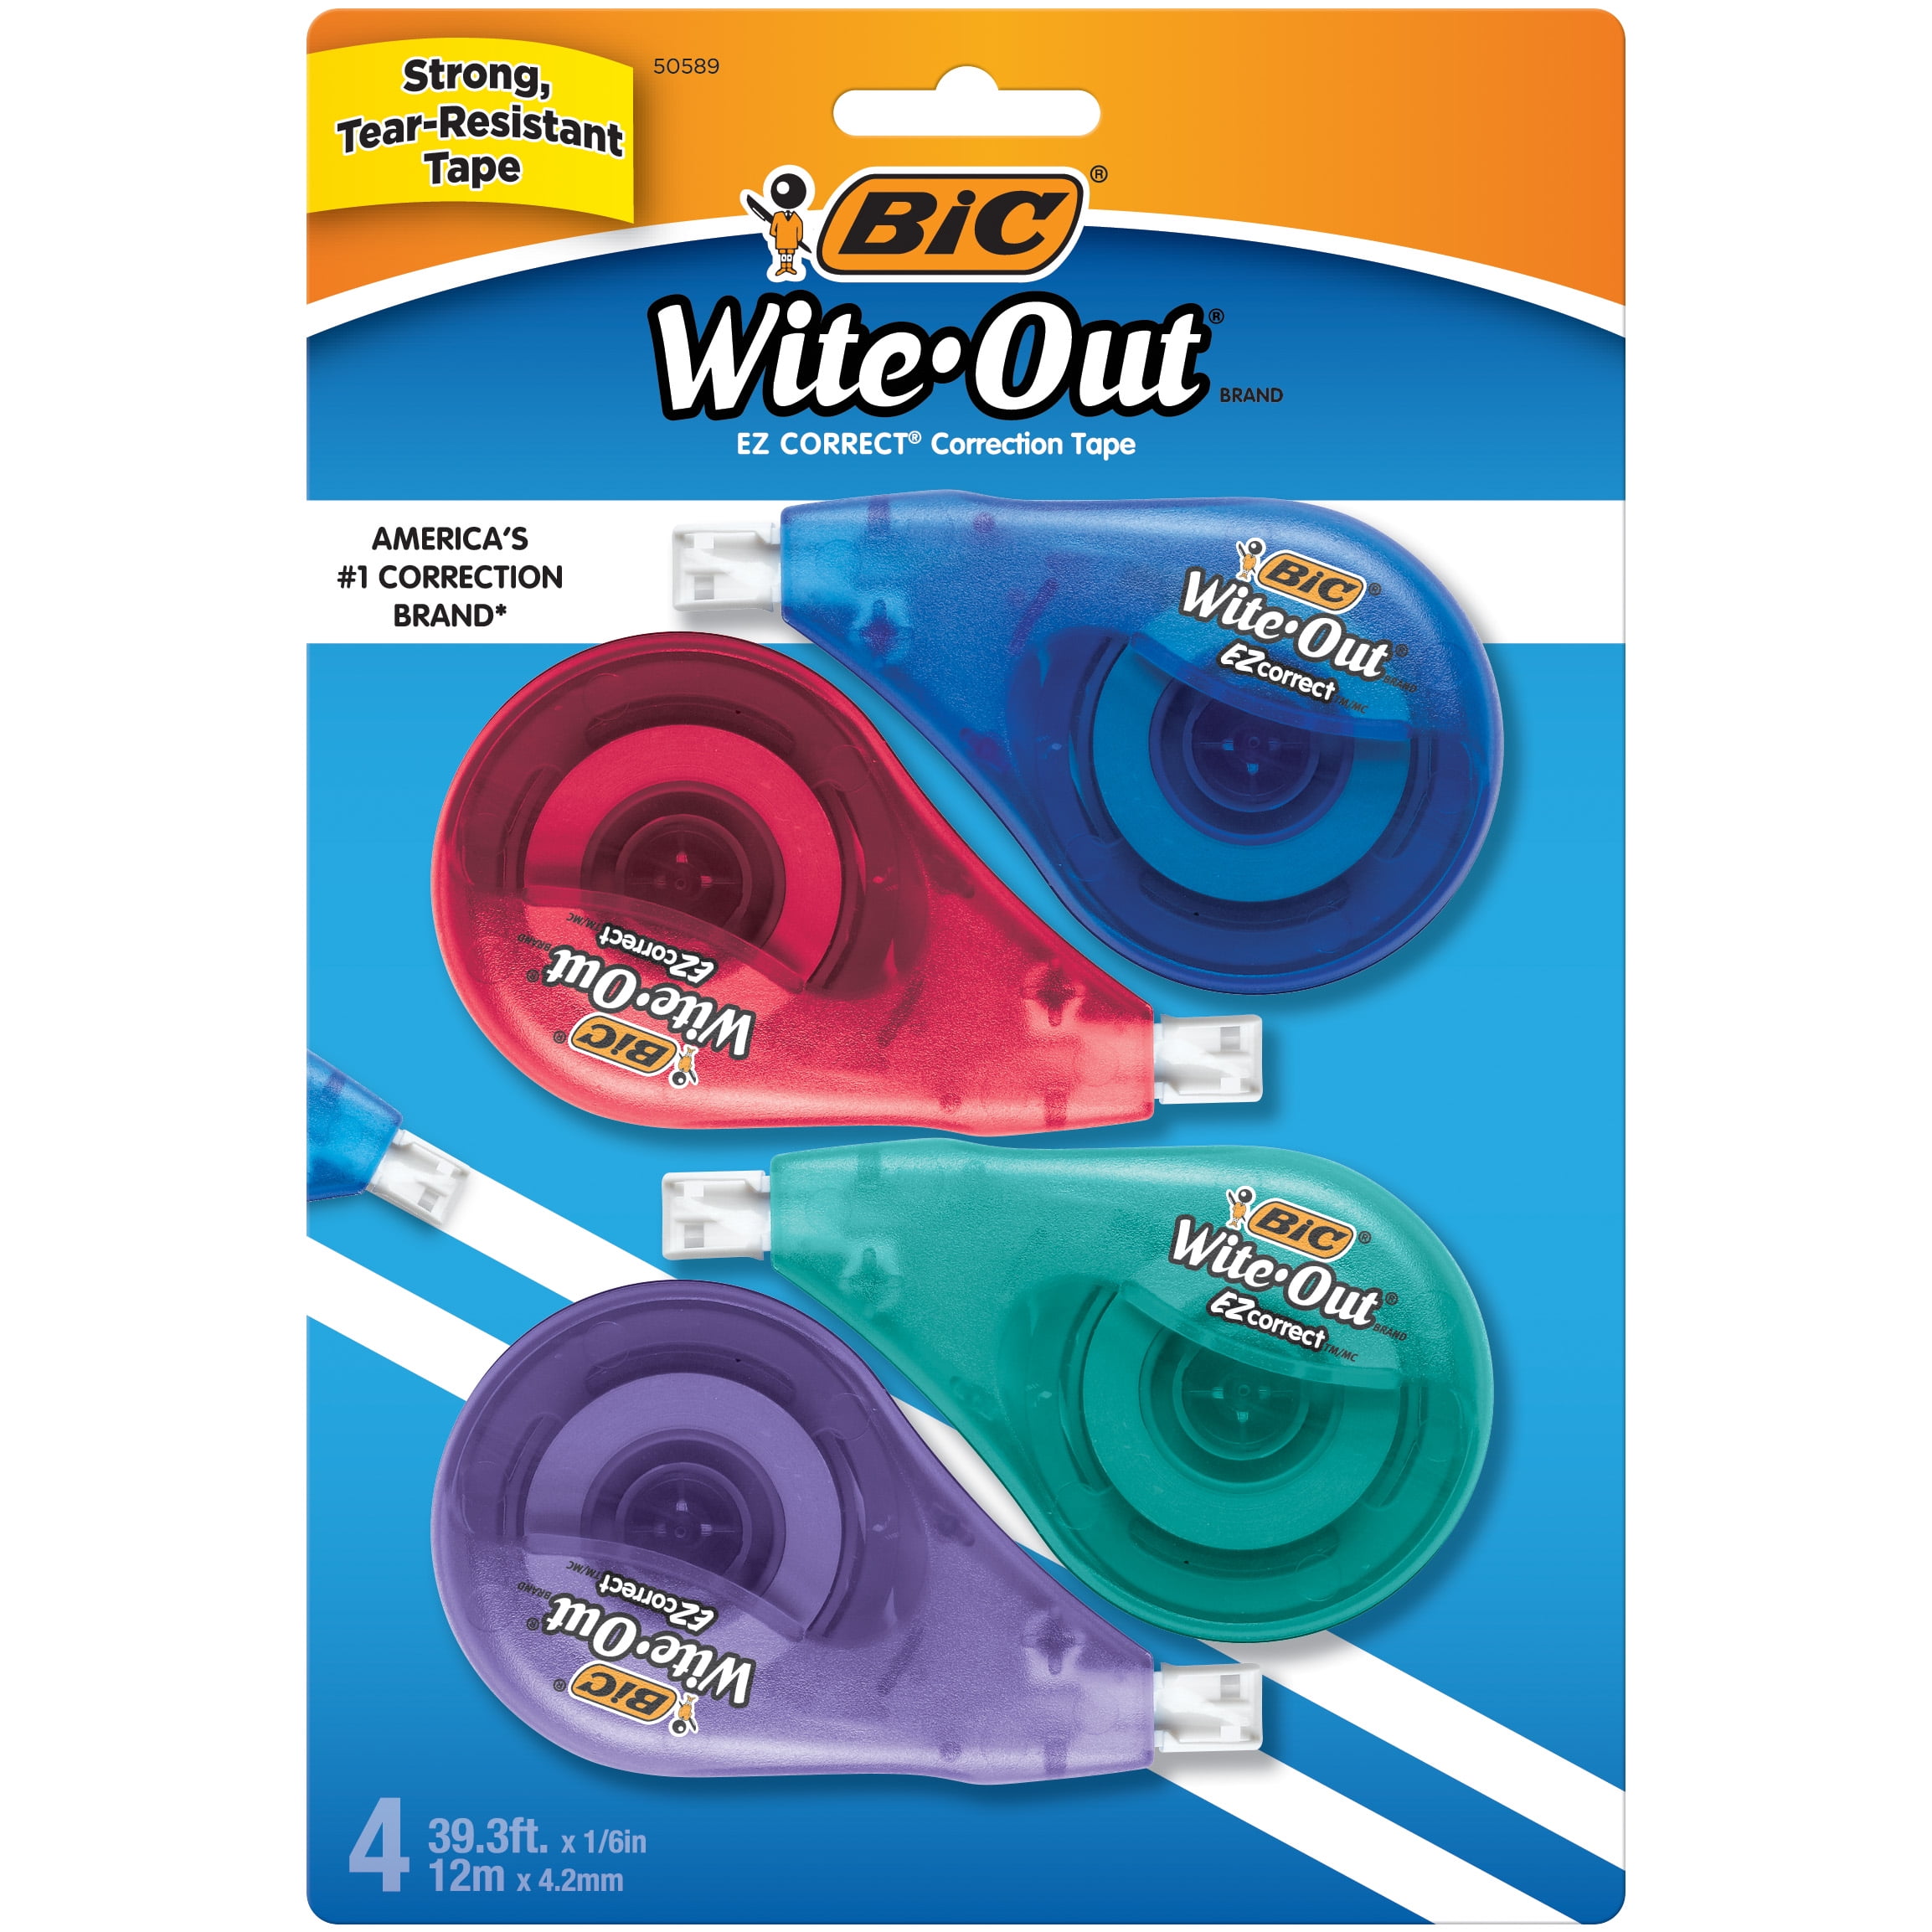 1 Tape Wite Out Correction Tape 